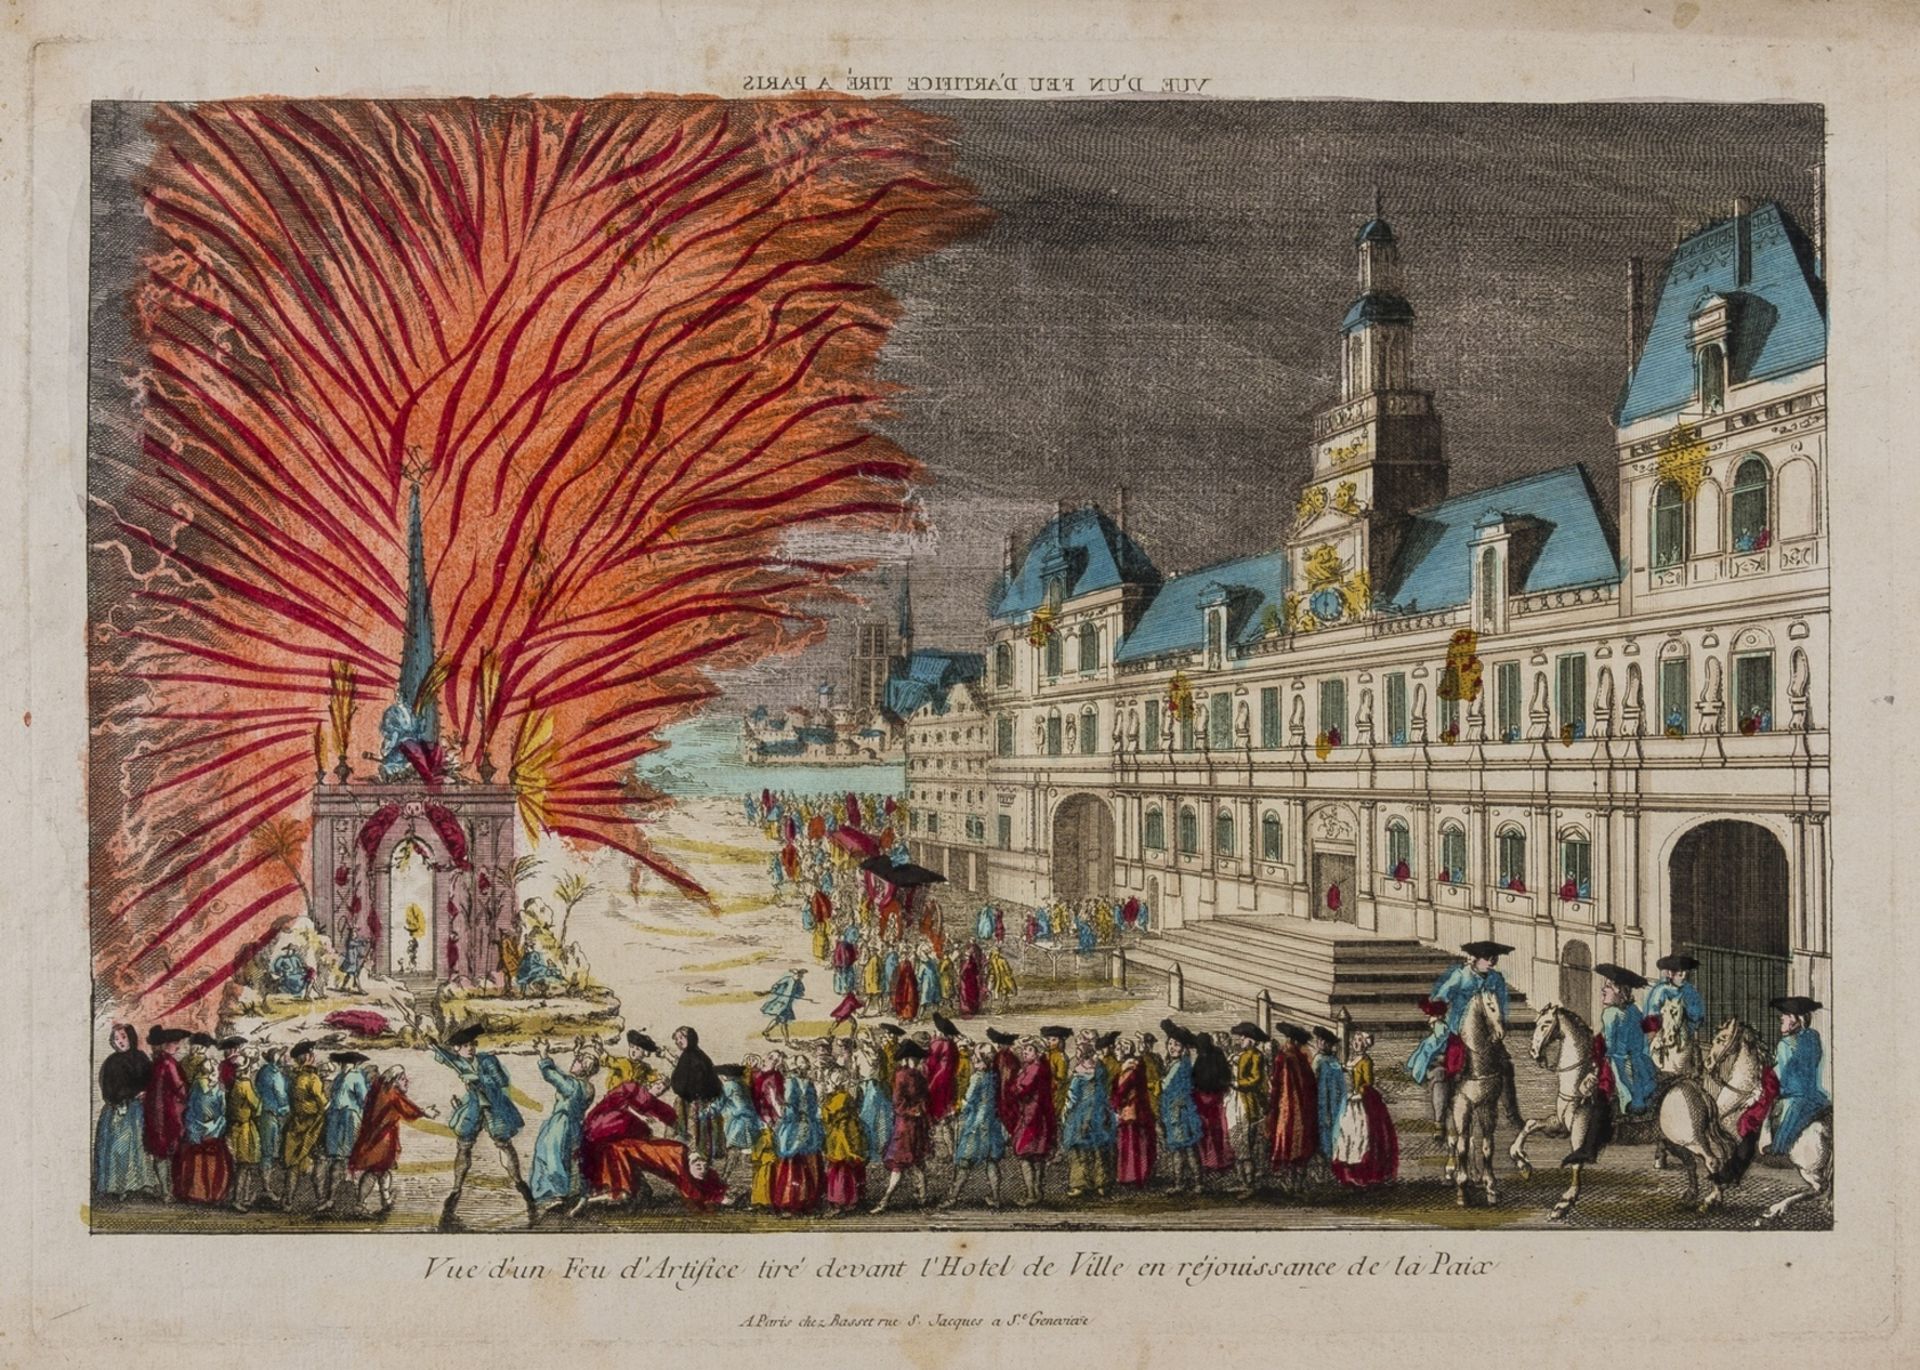 Fireworks.- Laurie & Whittle (publishers) A View of ye Grand Theatre & Fireworks erected on ye … - Image 2 of 2